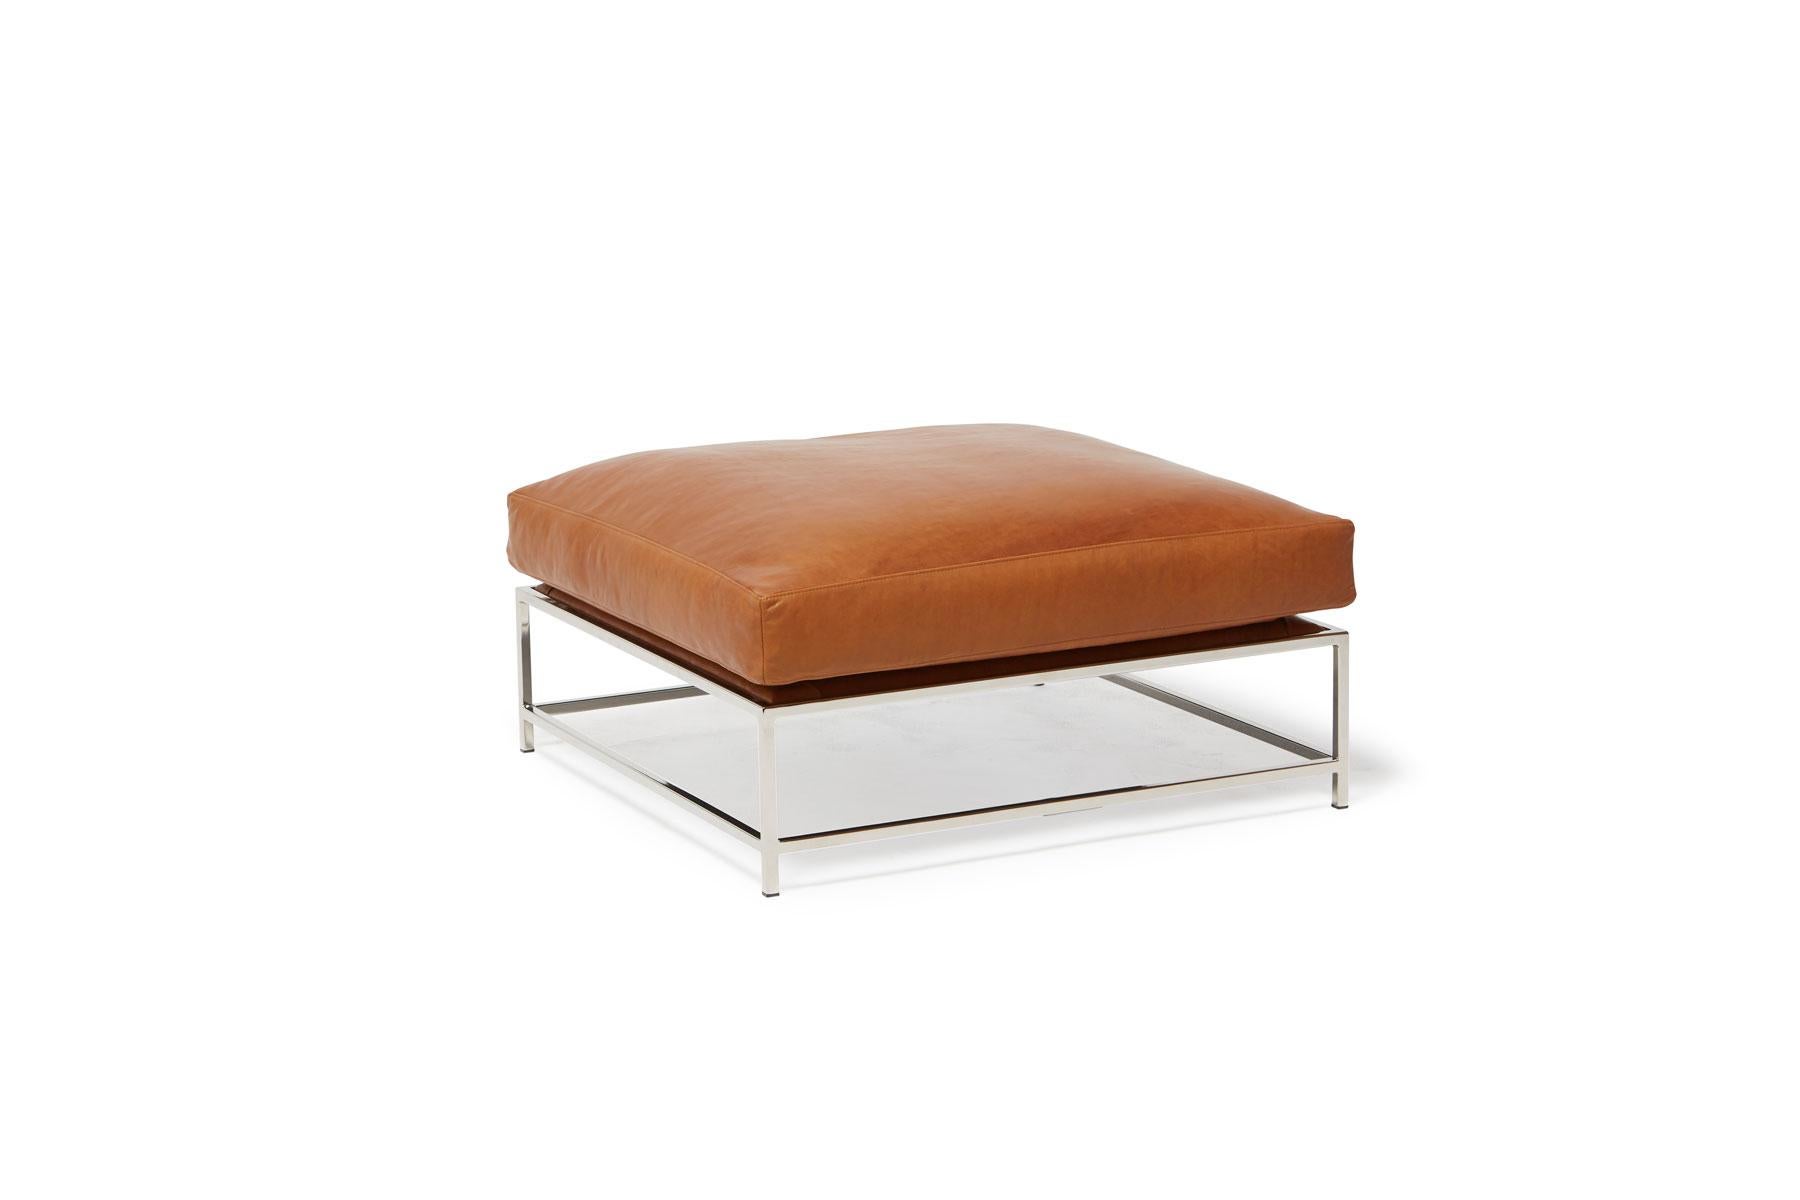 Designed to pair with any of the Inheritance Seating options, the Ottoman is a great addition to add a lounge element to your seating arrangement. 

This variation is a custom sized 36